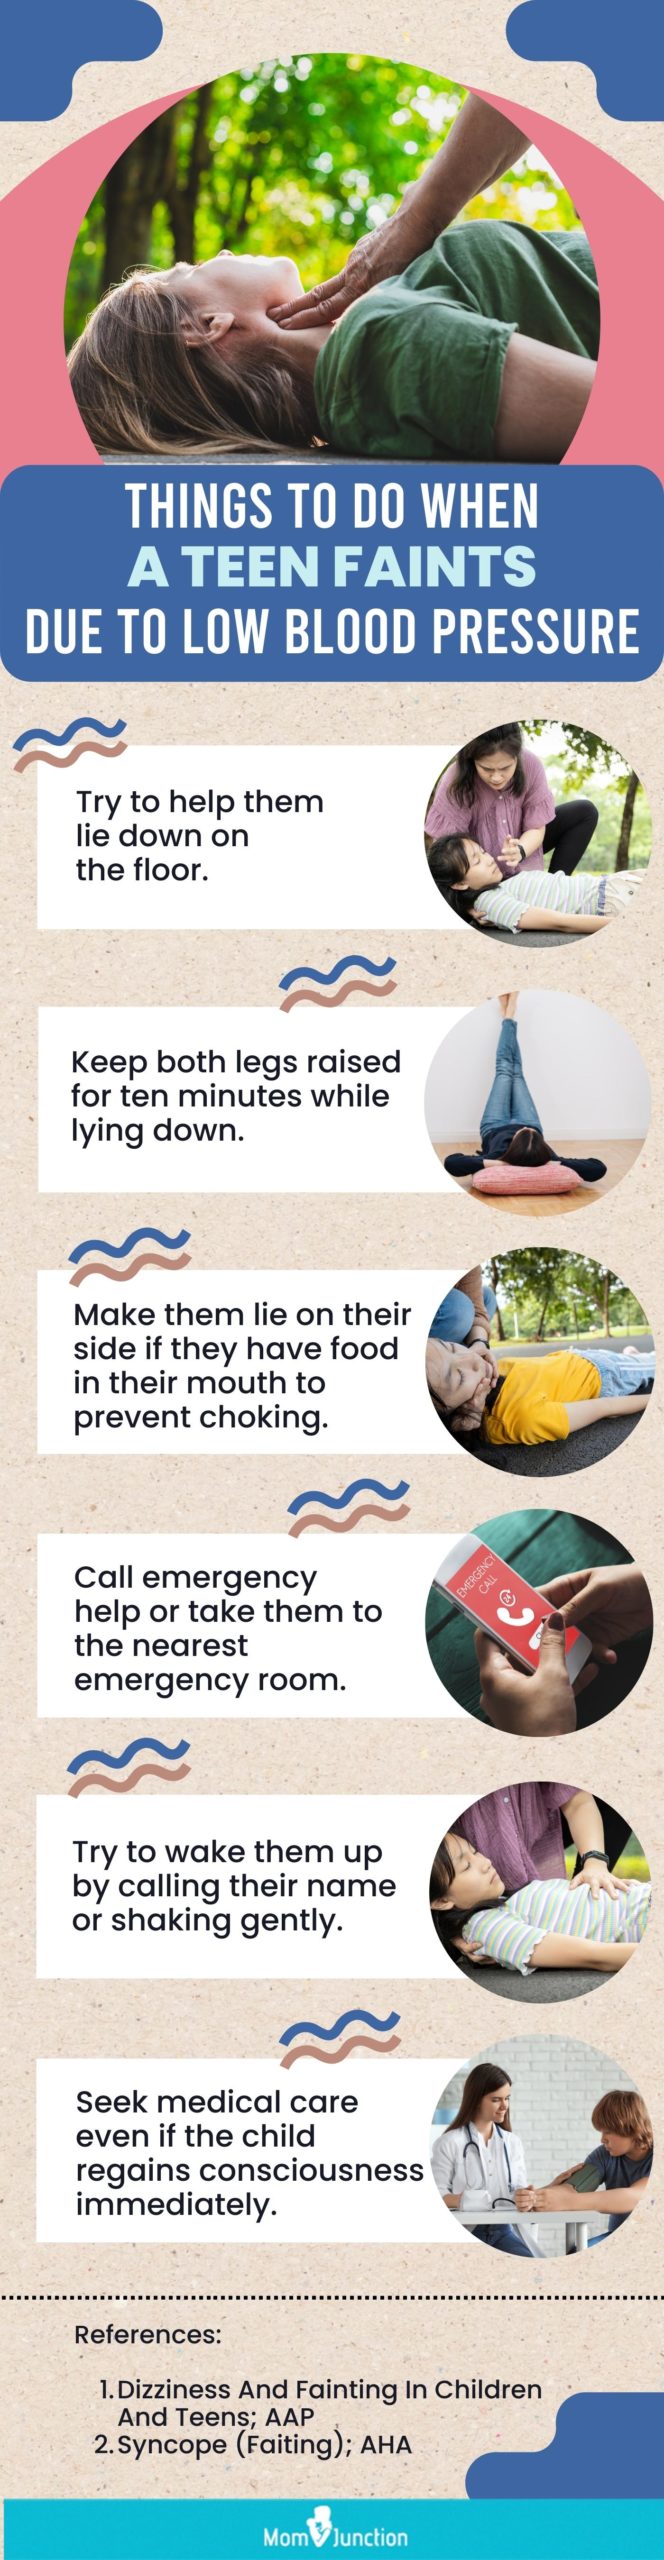 things to do when a teen faints due to low blood pressure 2 [infographic]